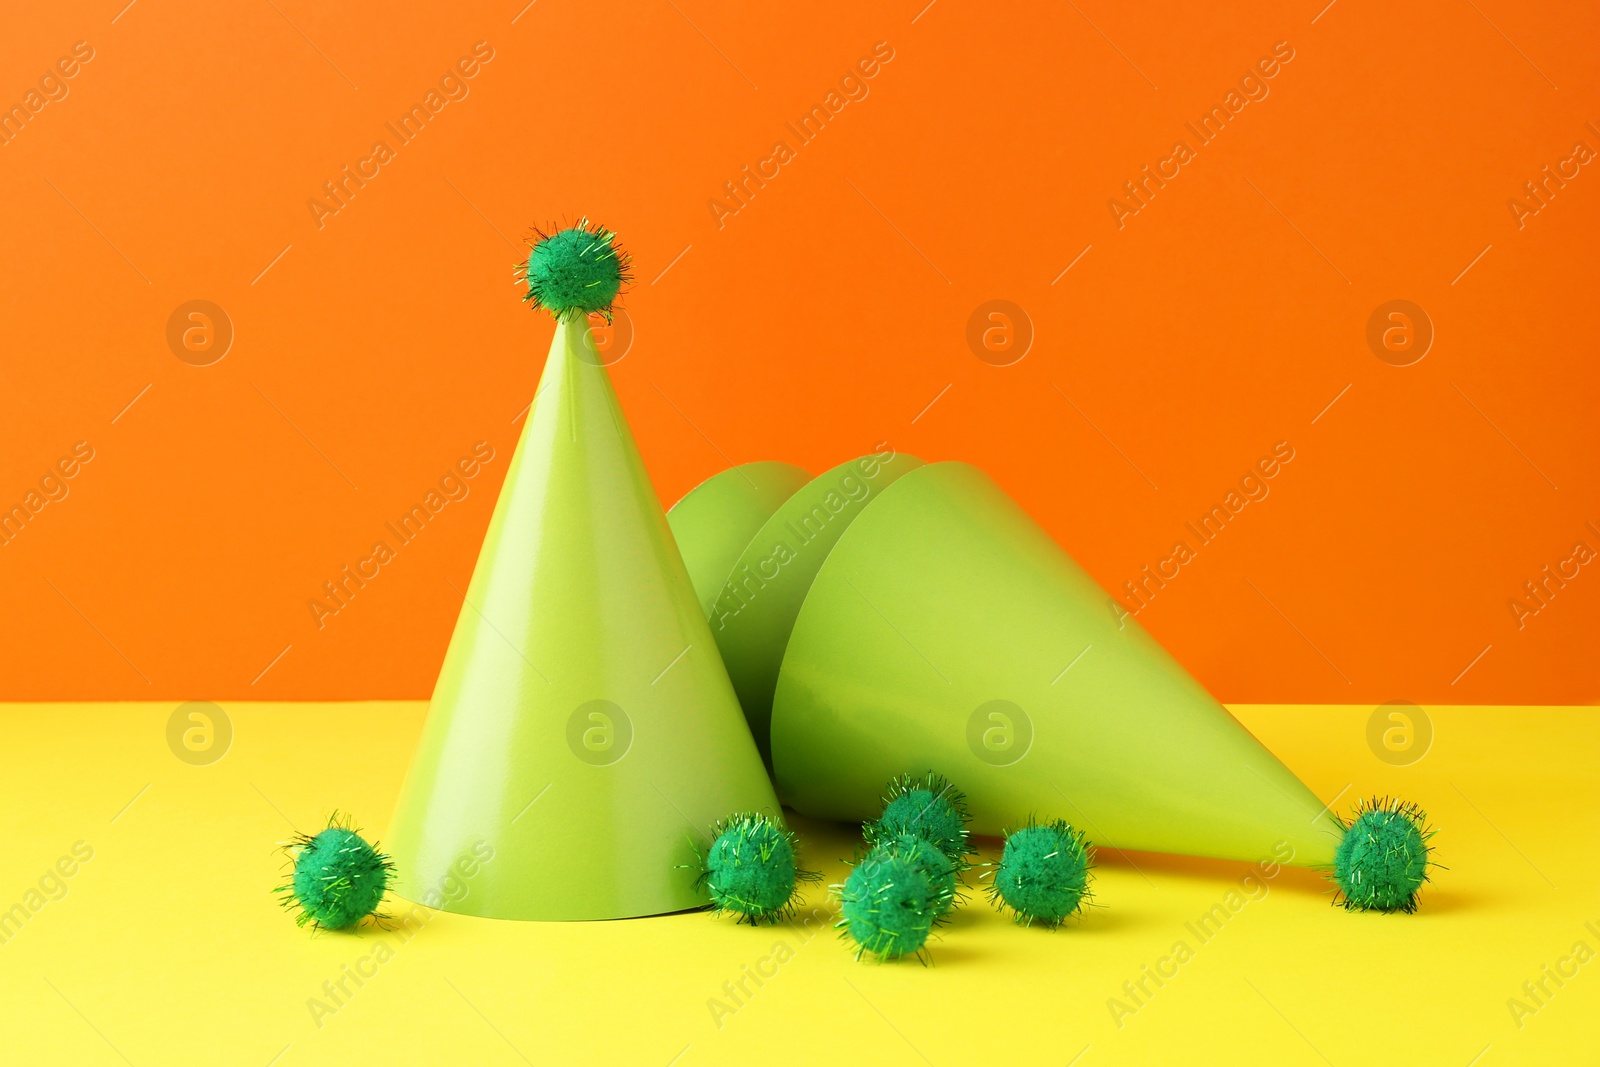 Photo of Party hats on yellow table against orange background